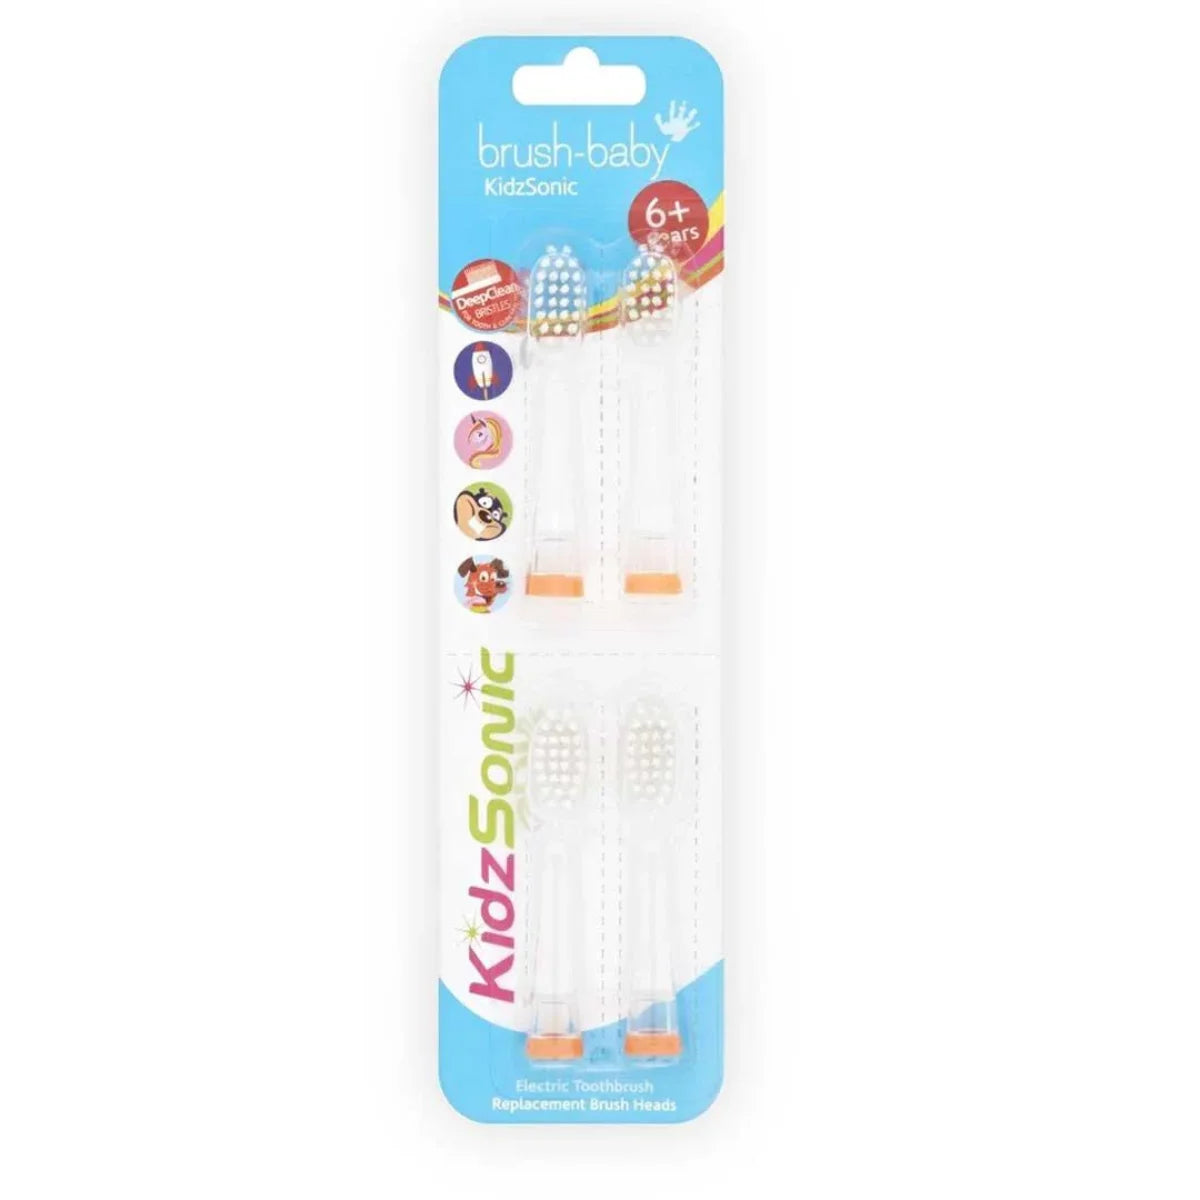 4 pack of clear kids sonic replacement toothbrush heads